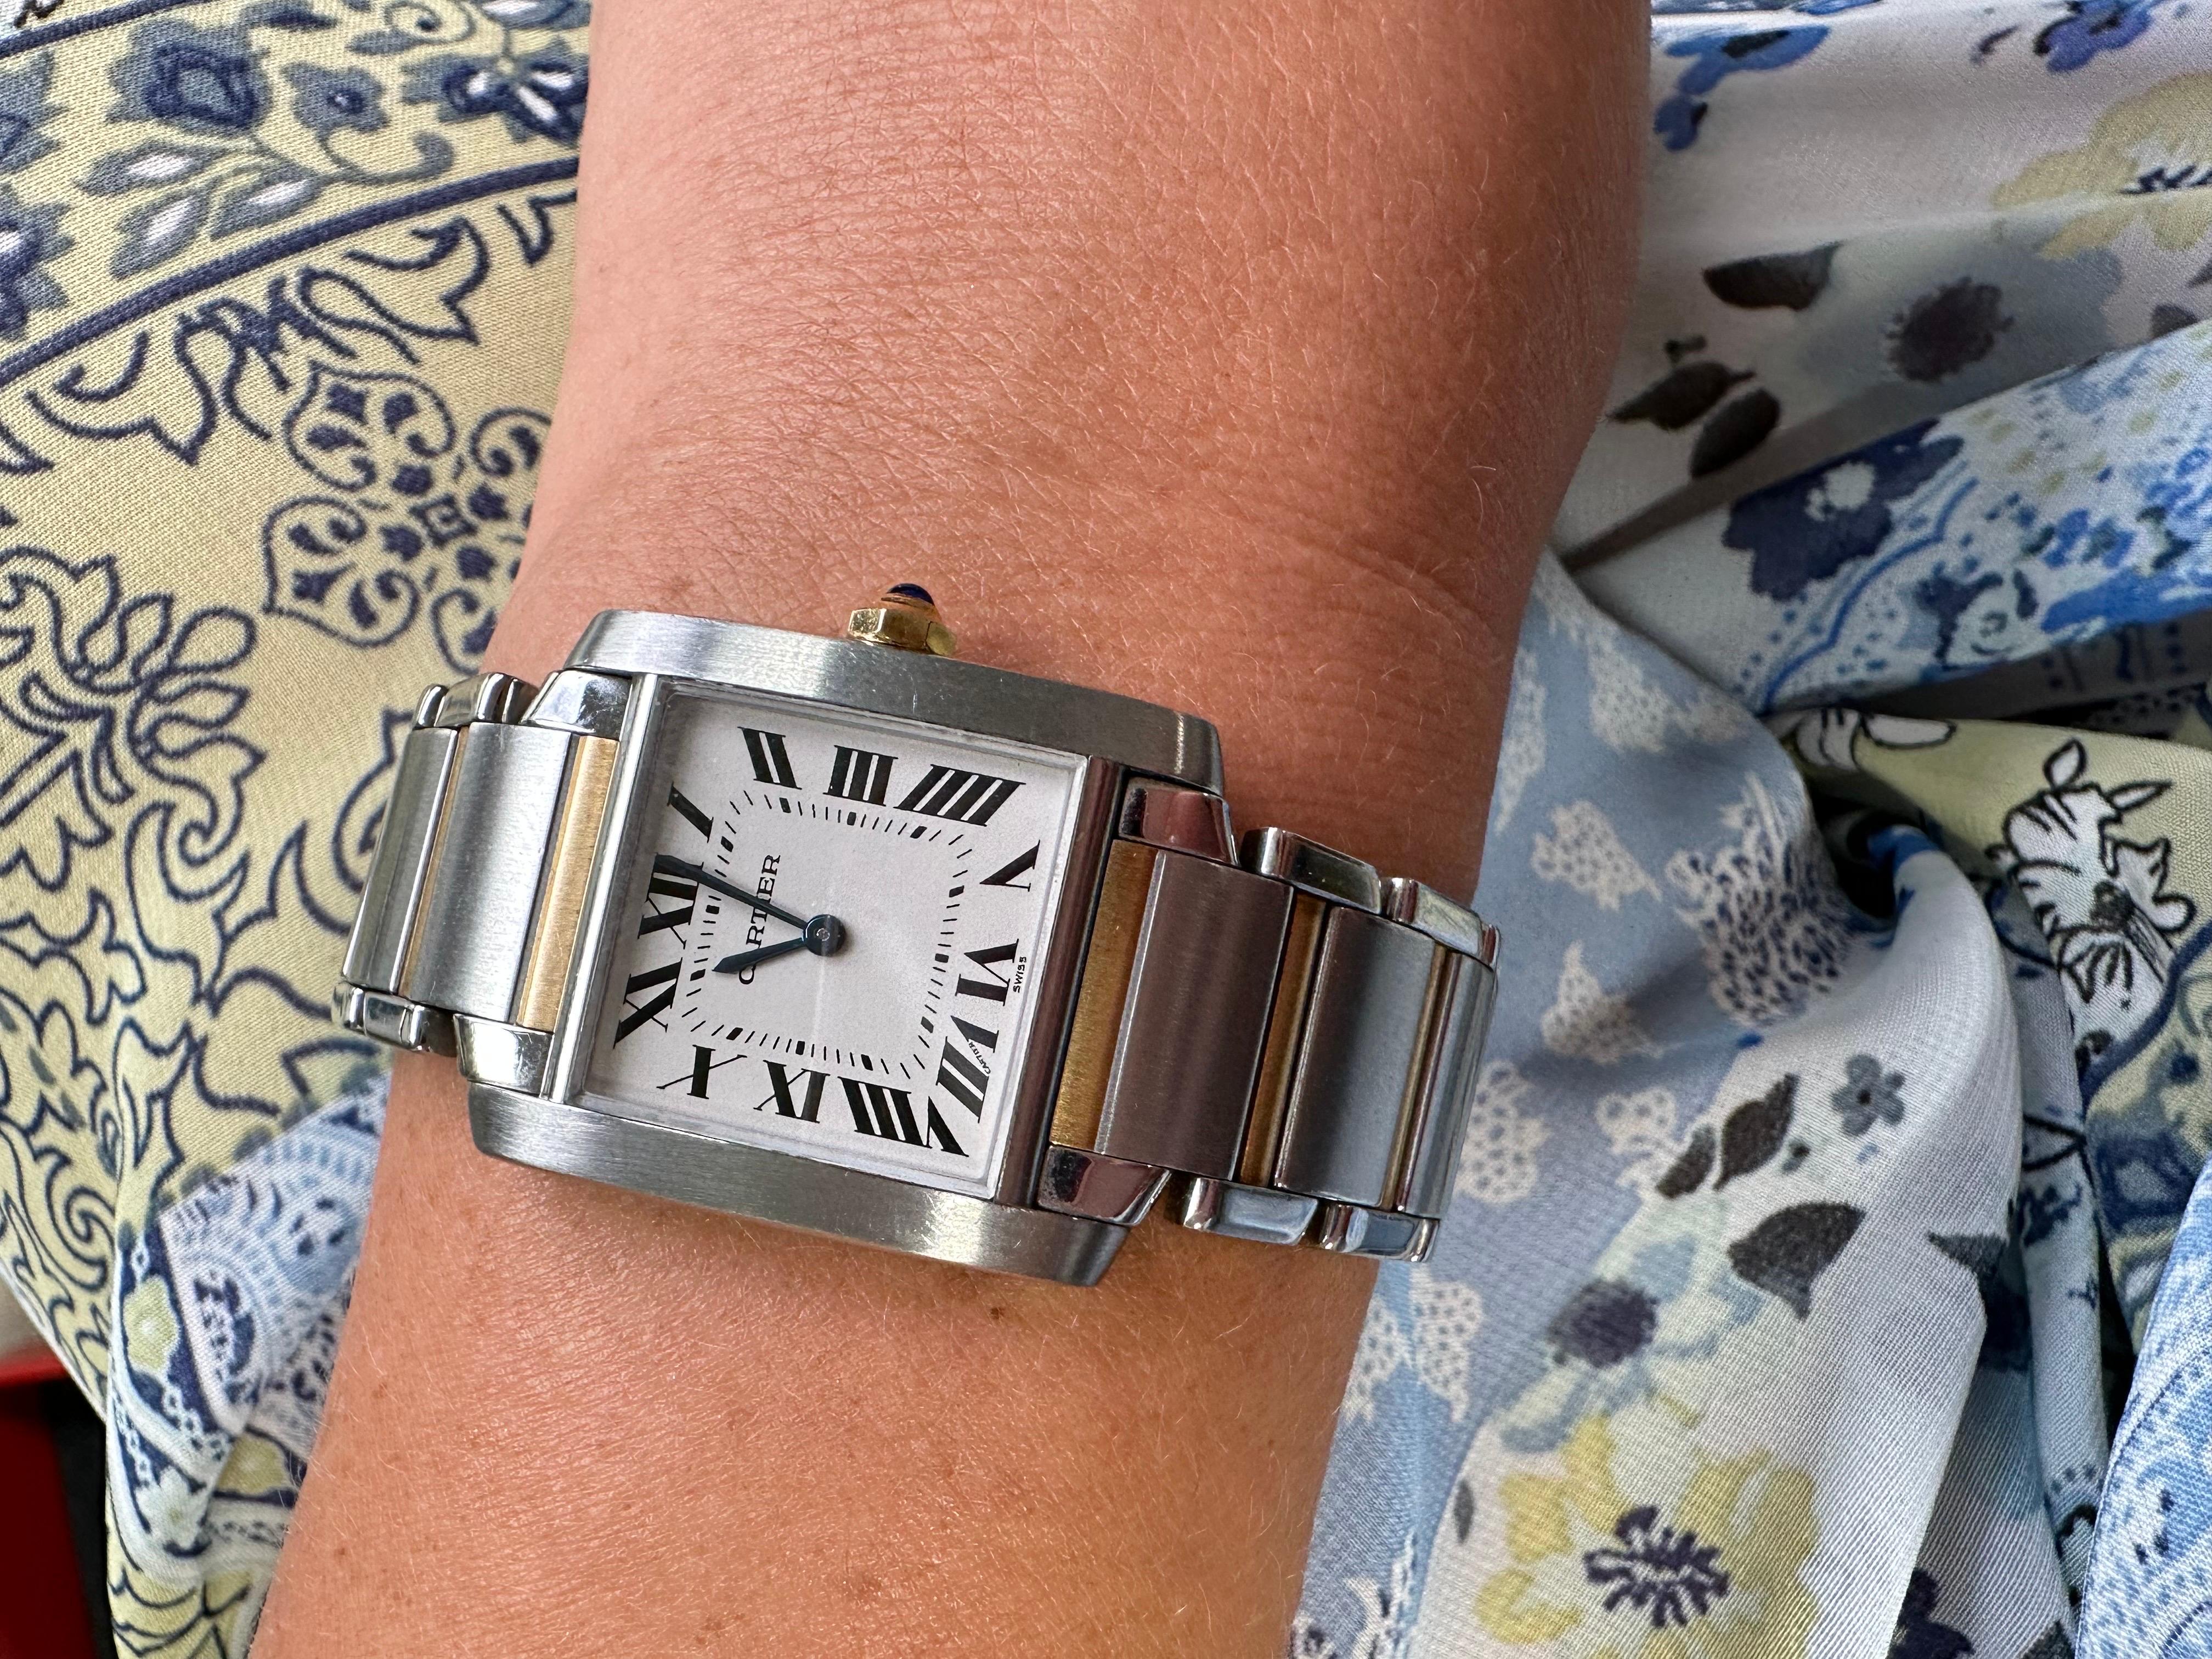 Cartier Tank Francaise Midsize Watch Stainless Steel 18 Karat In Excellent Condition For Sale In Jupiter, FL